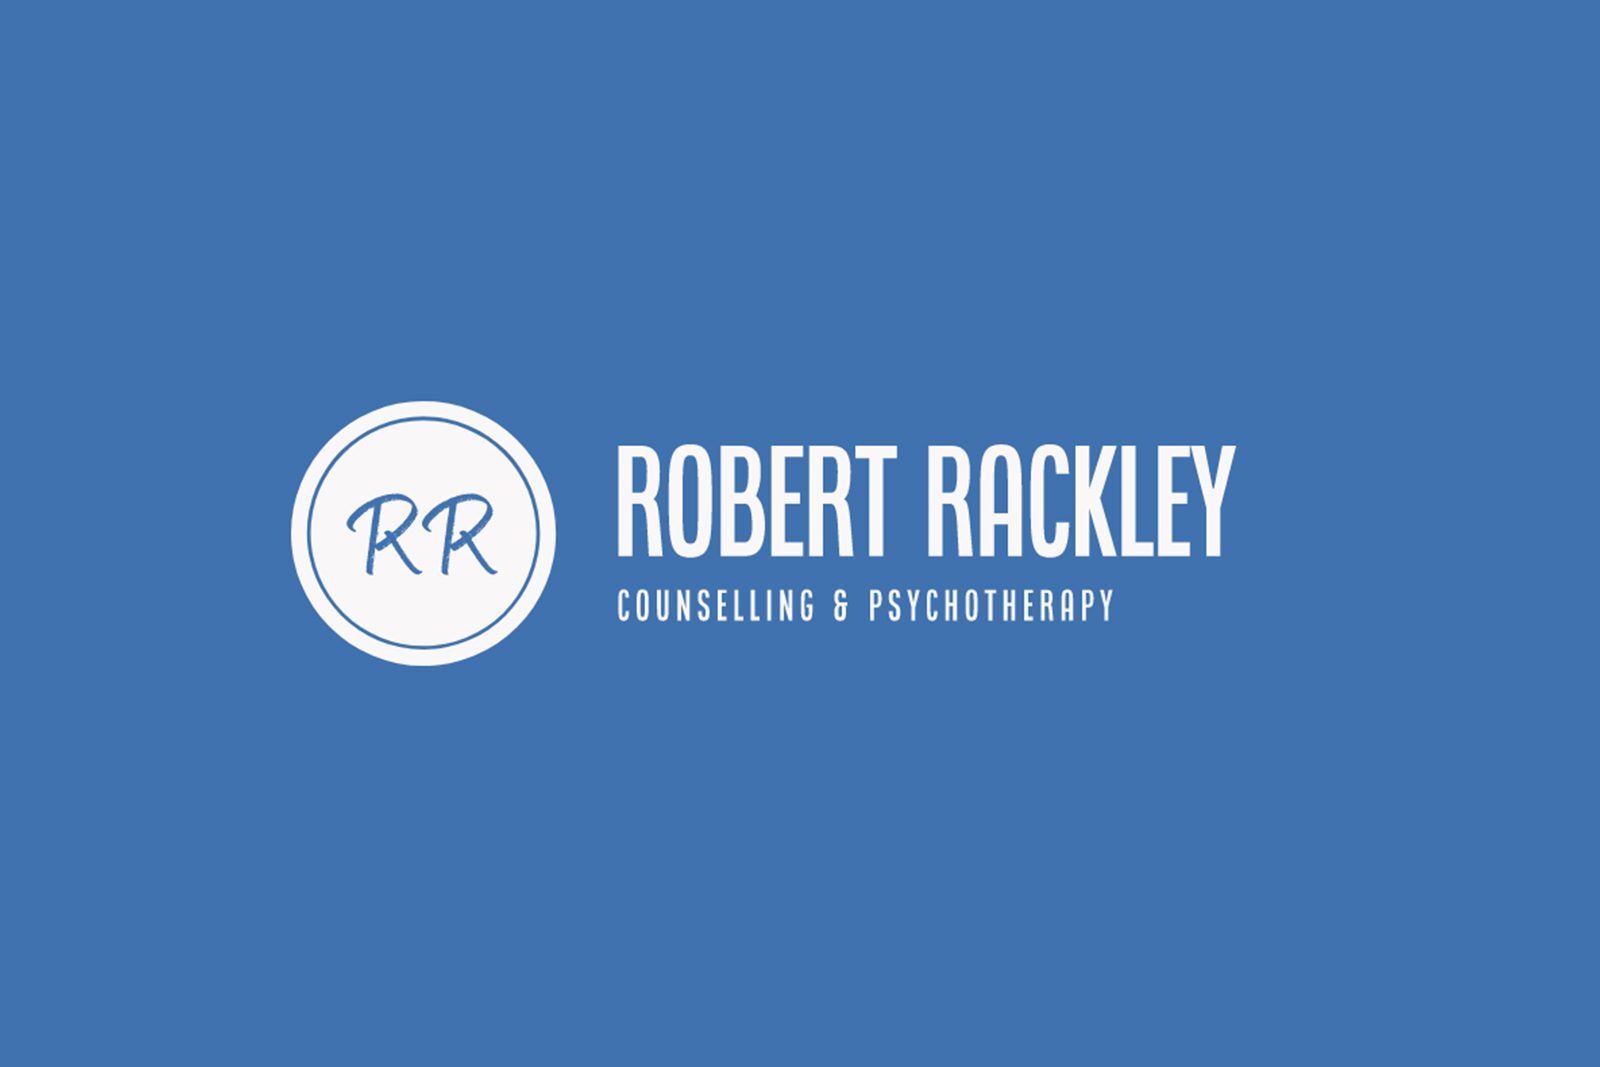 Robert Rackley Counselling